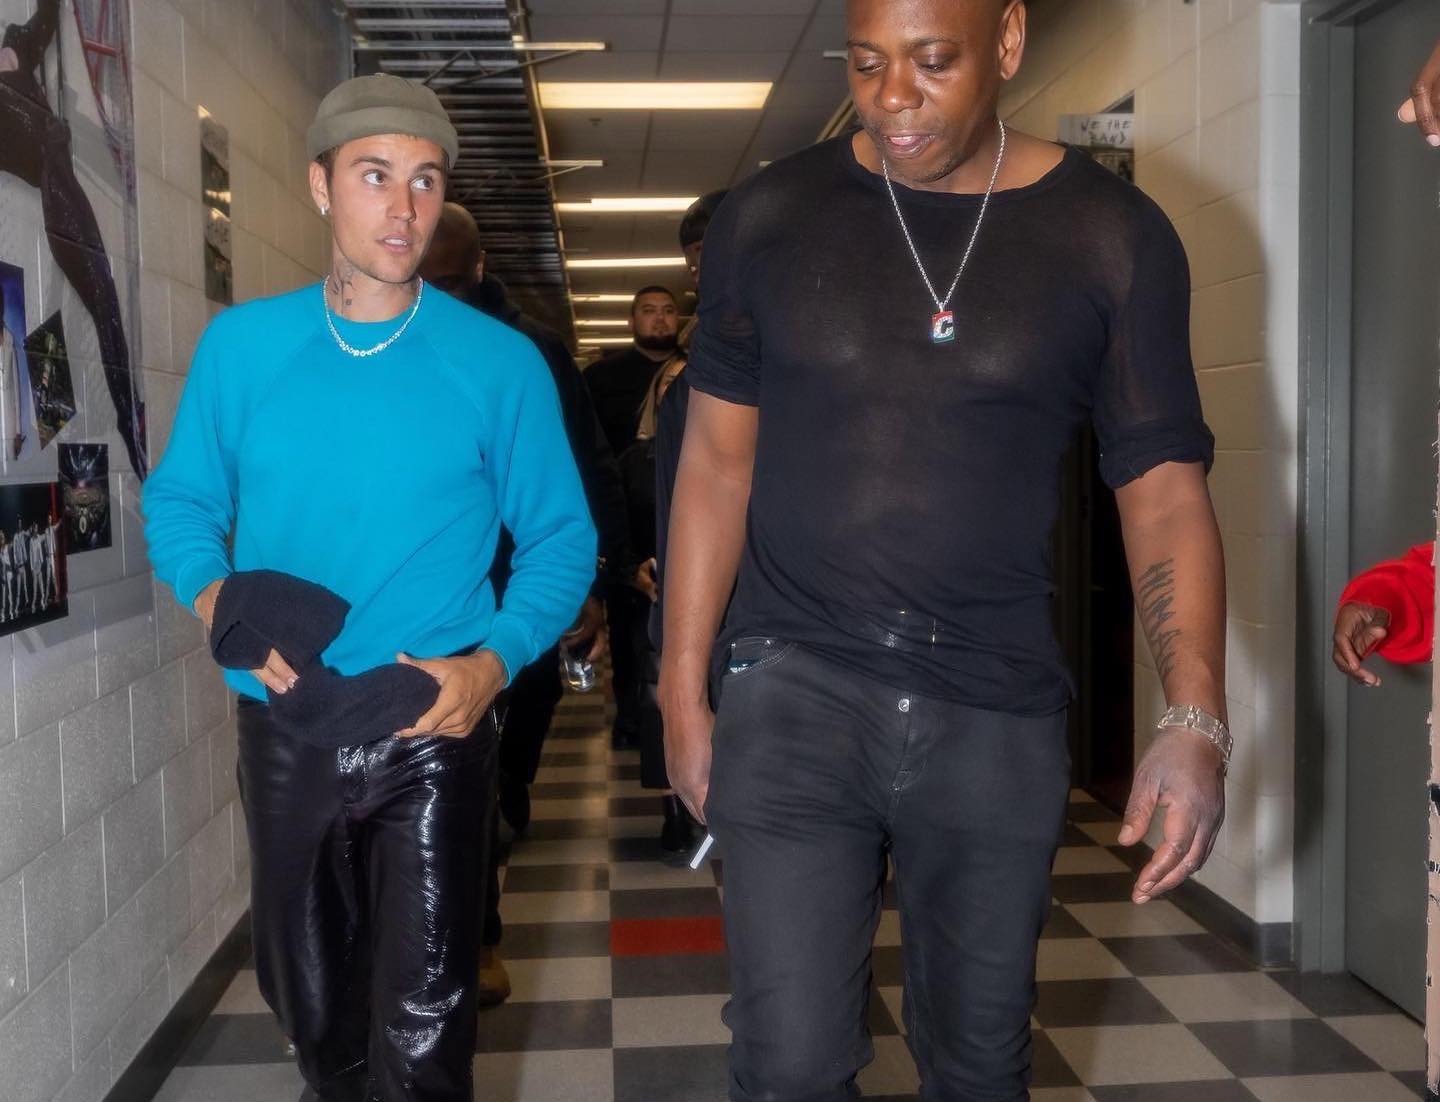 SPOTTED: Justin Bieber Backstage in Balenciaga & Blue